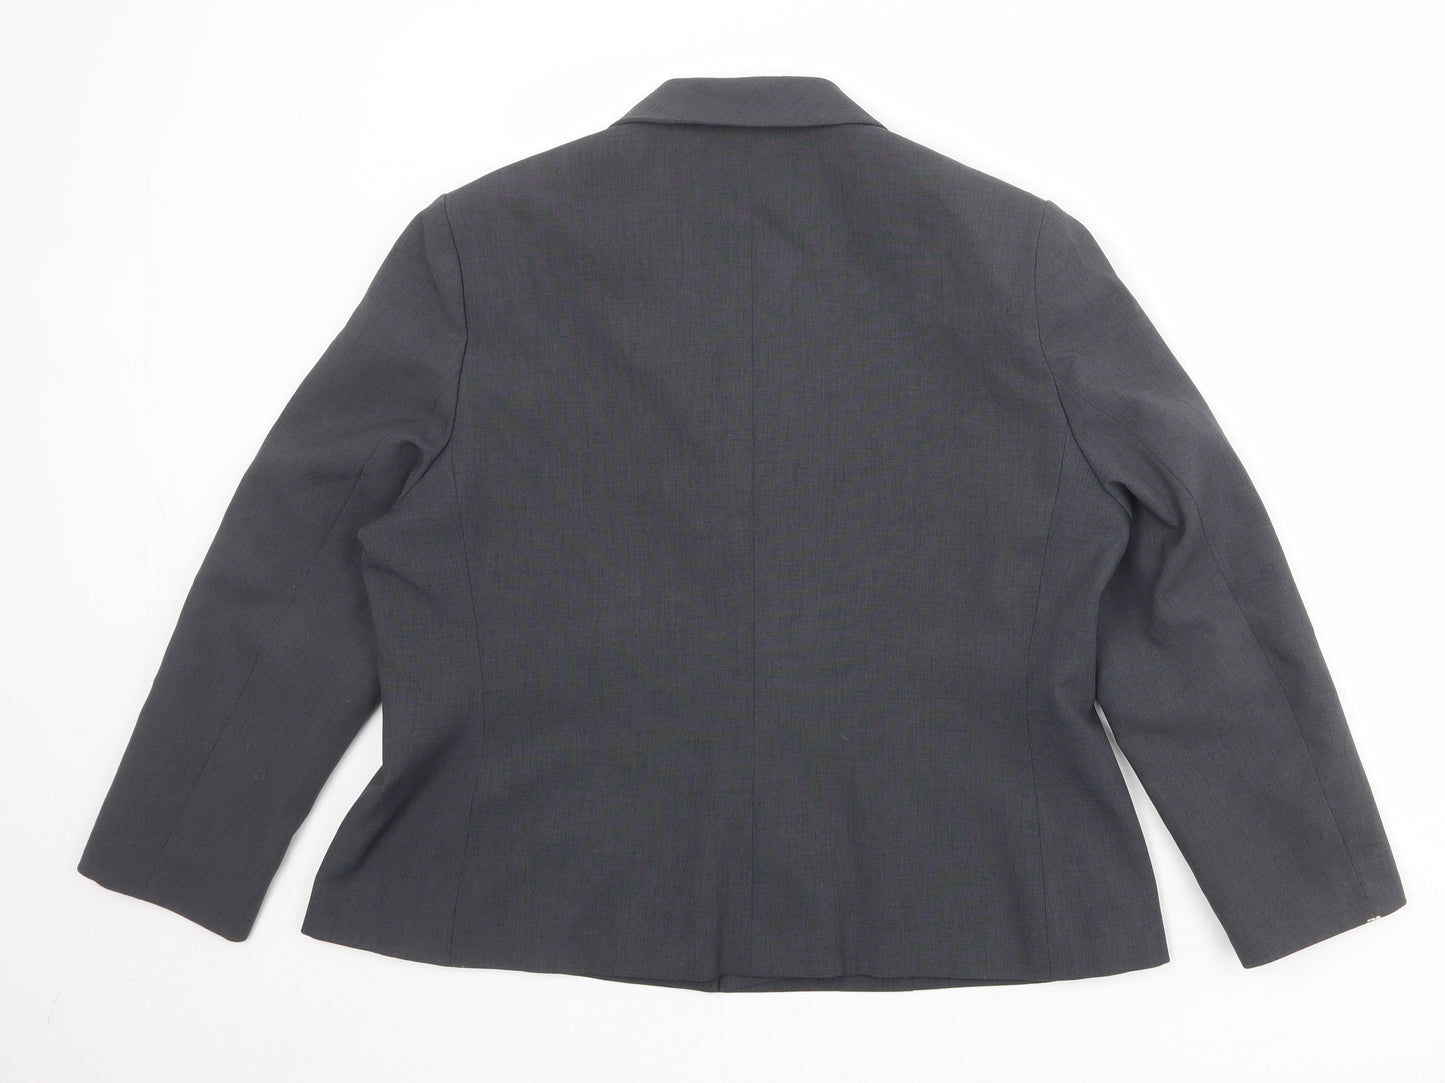 Marks and Spencer Womens Grey Polyester Jacket Suit Jacket Size 18